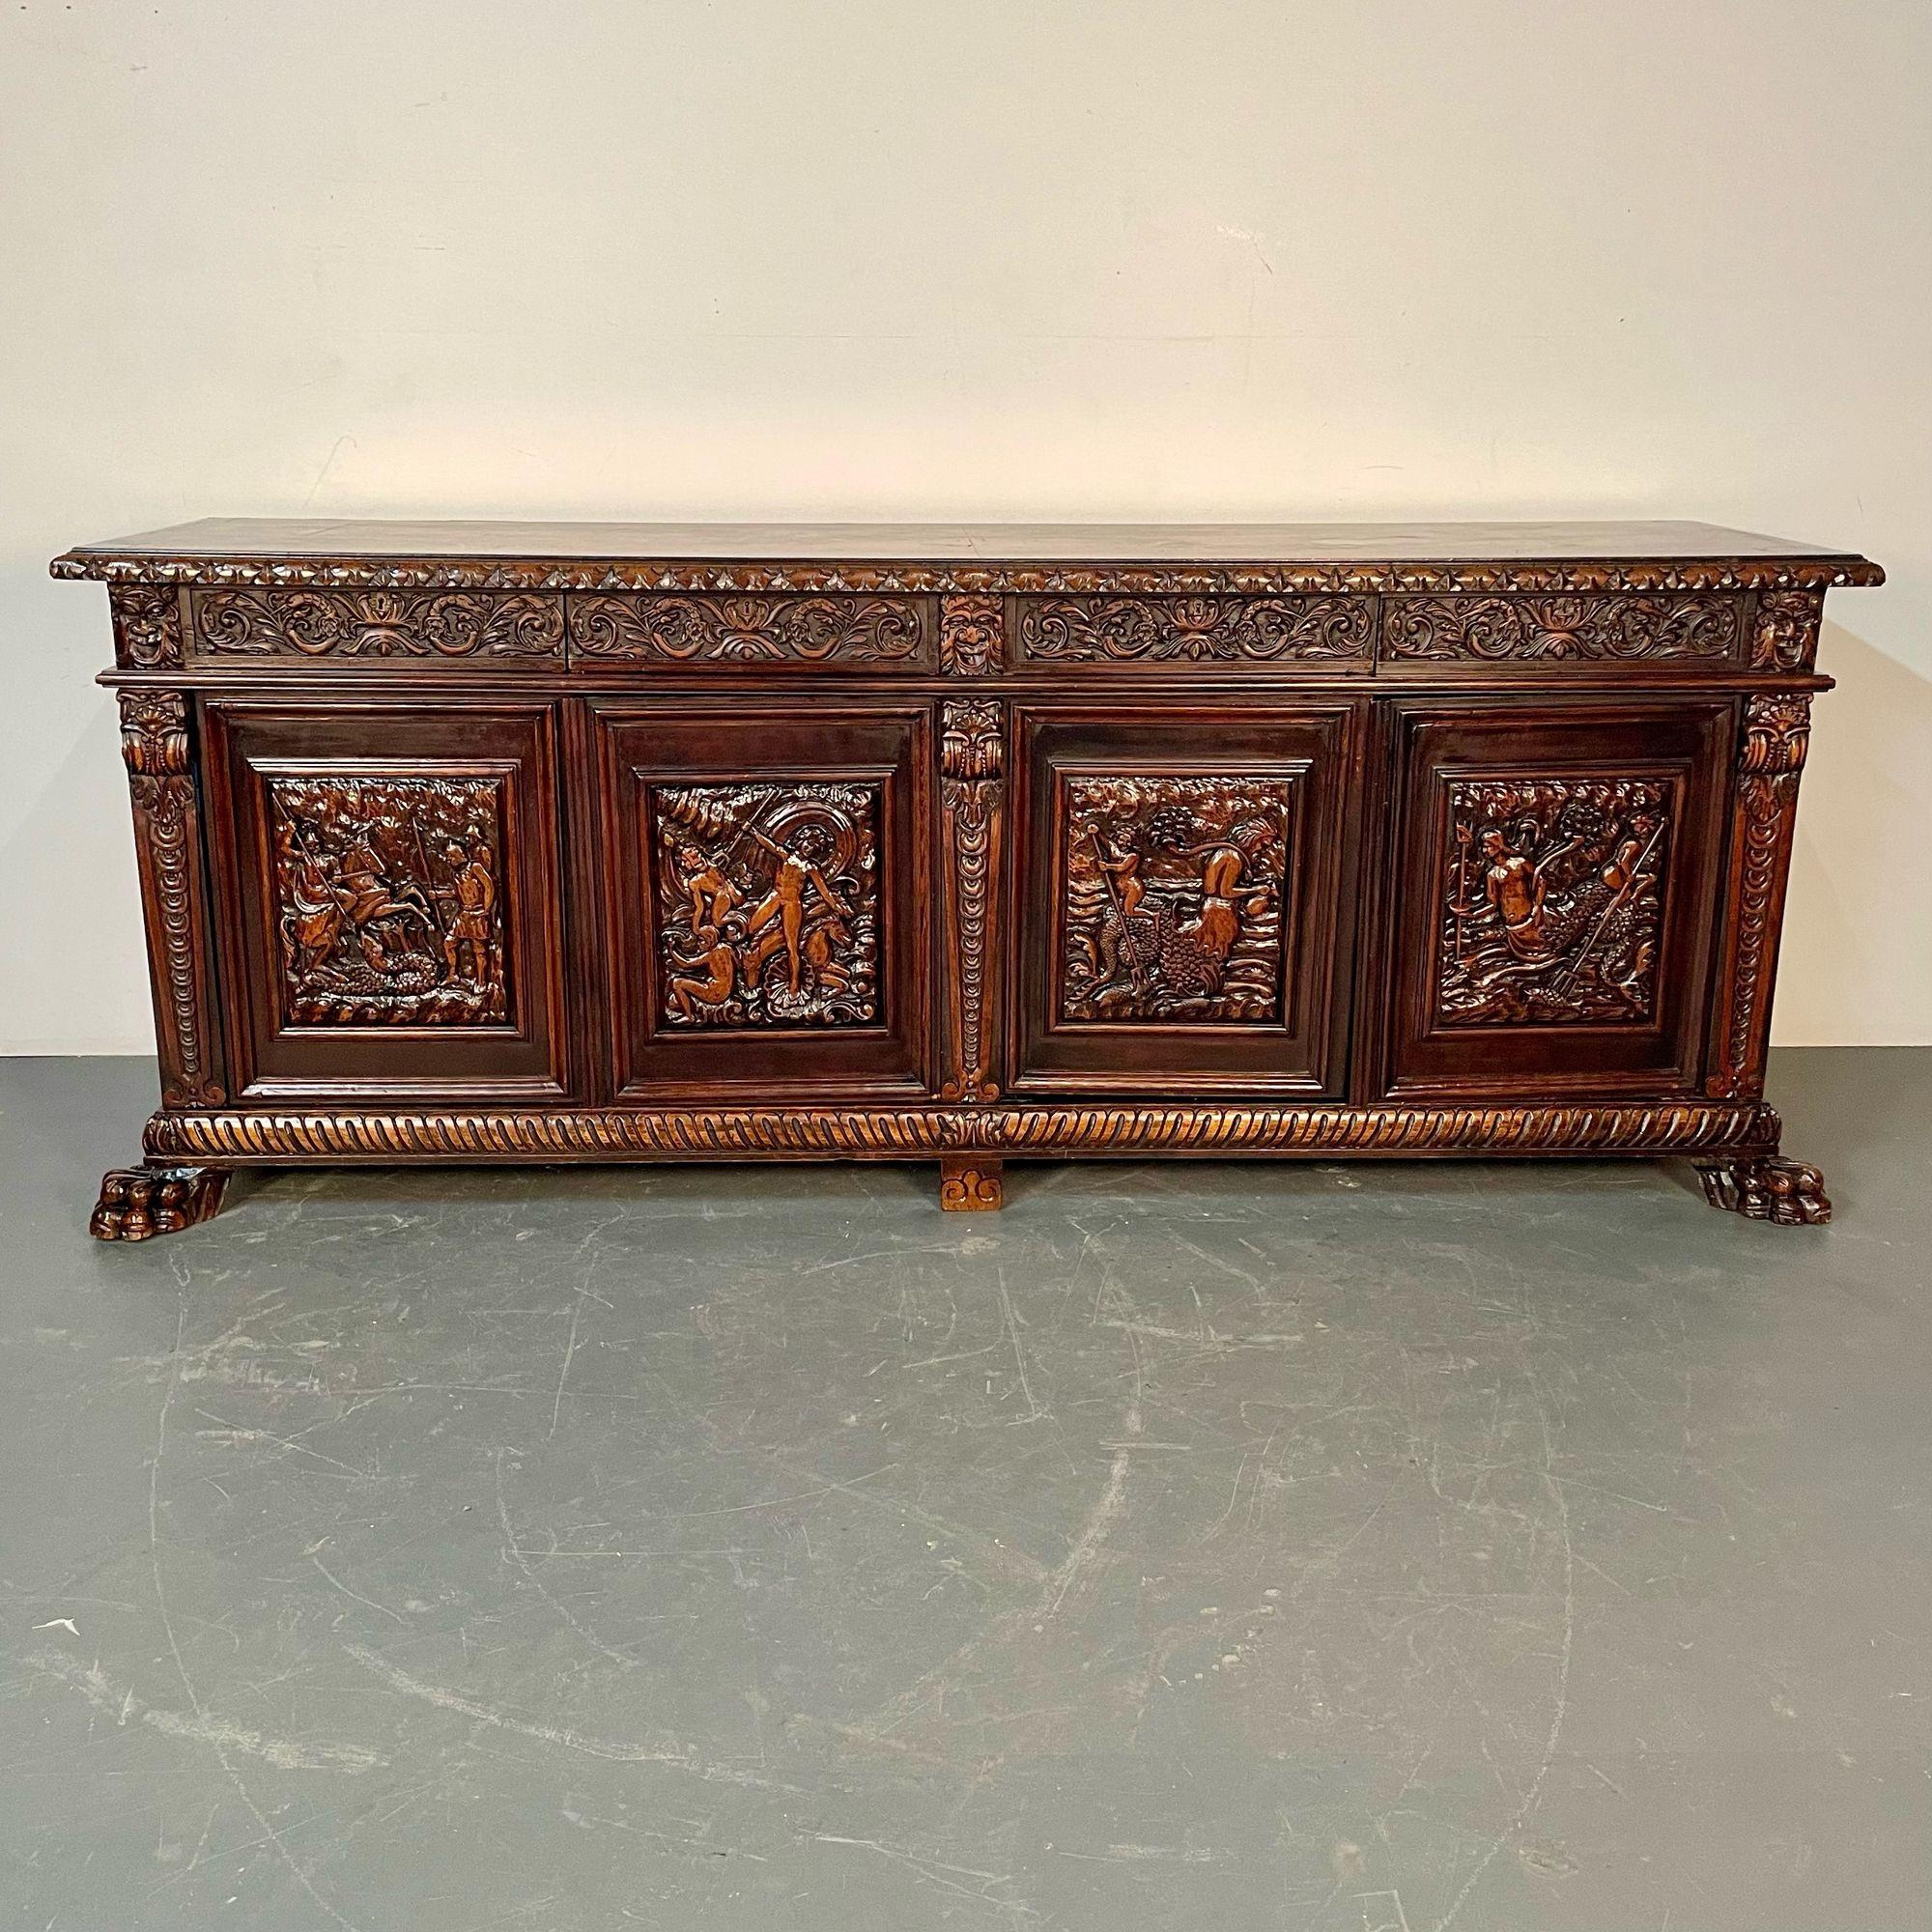 Monumental Renaissance Revival Sideboard, Heavily Carved, Mahogany, Branded In Fair Condition For Sale In Stamford, CT